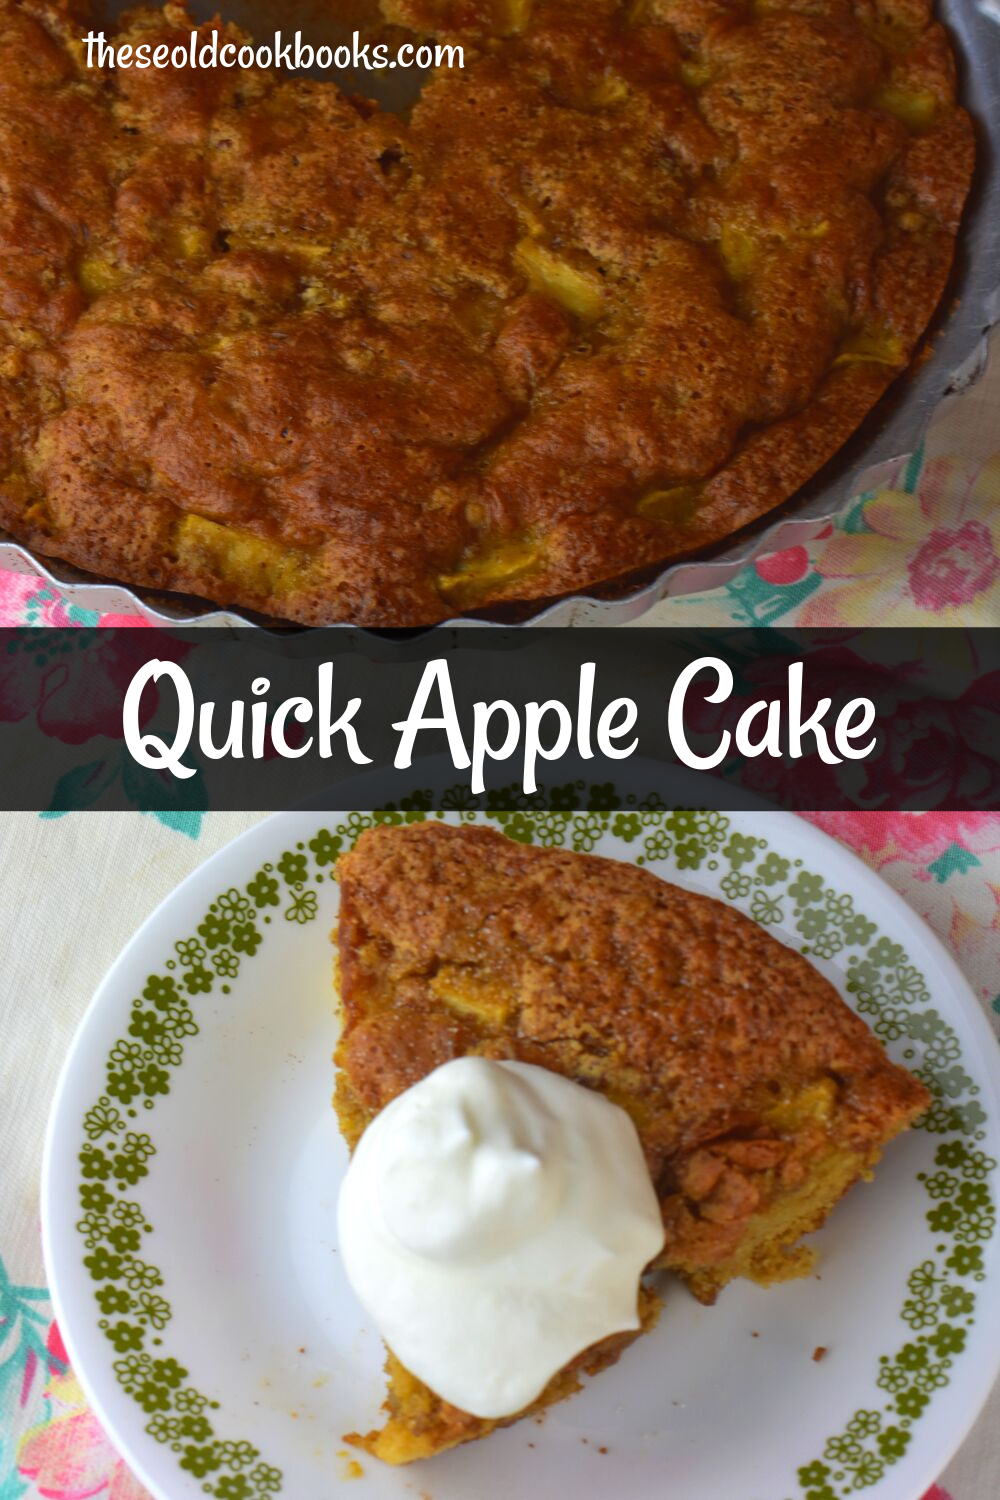 This easy apple cake is unique because it's baked in a pie plate. It's a thin cake that bakes quickly. The batter is thick and sticky, and absolutely tempting to eat on your finger!